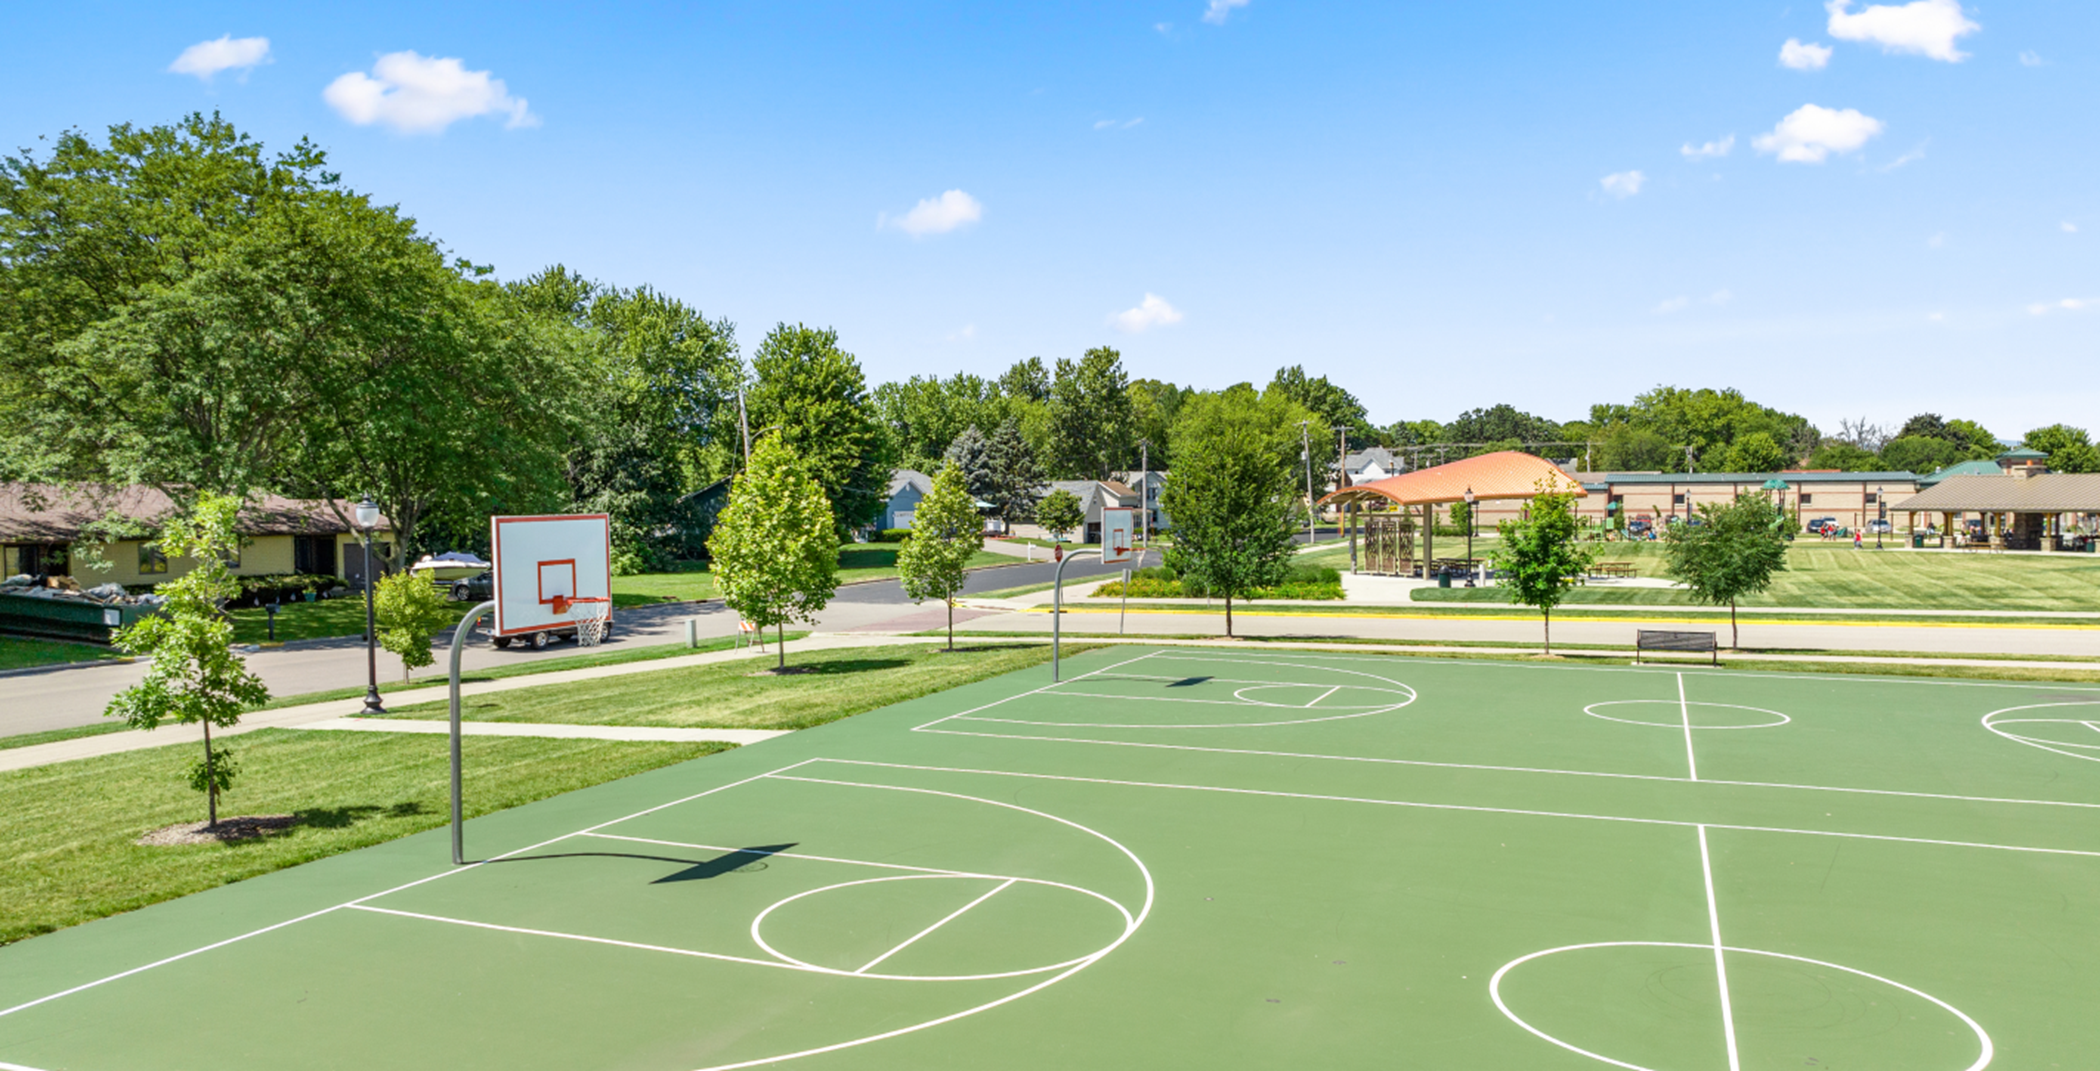 Local Basketball Courts